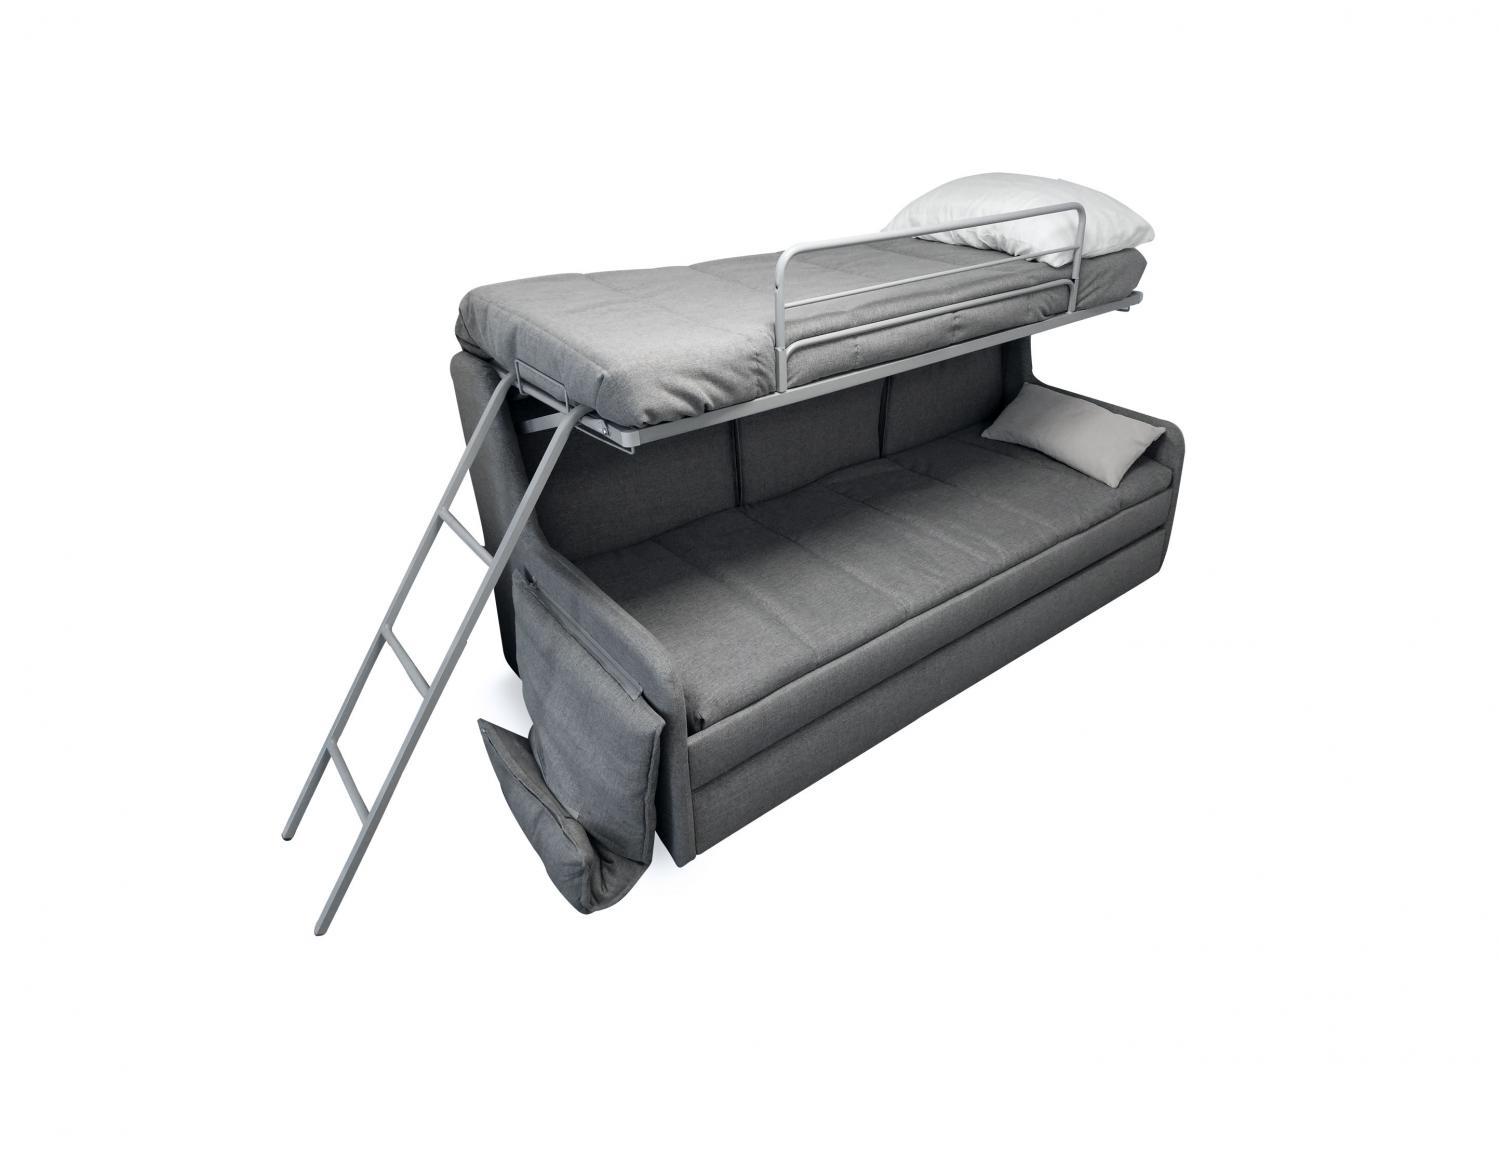 This Transforming Bunk Bed Sleeps 3 And, How Much Is A Sofa Bunk Bed